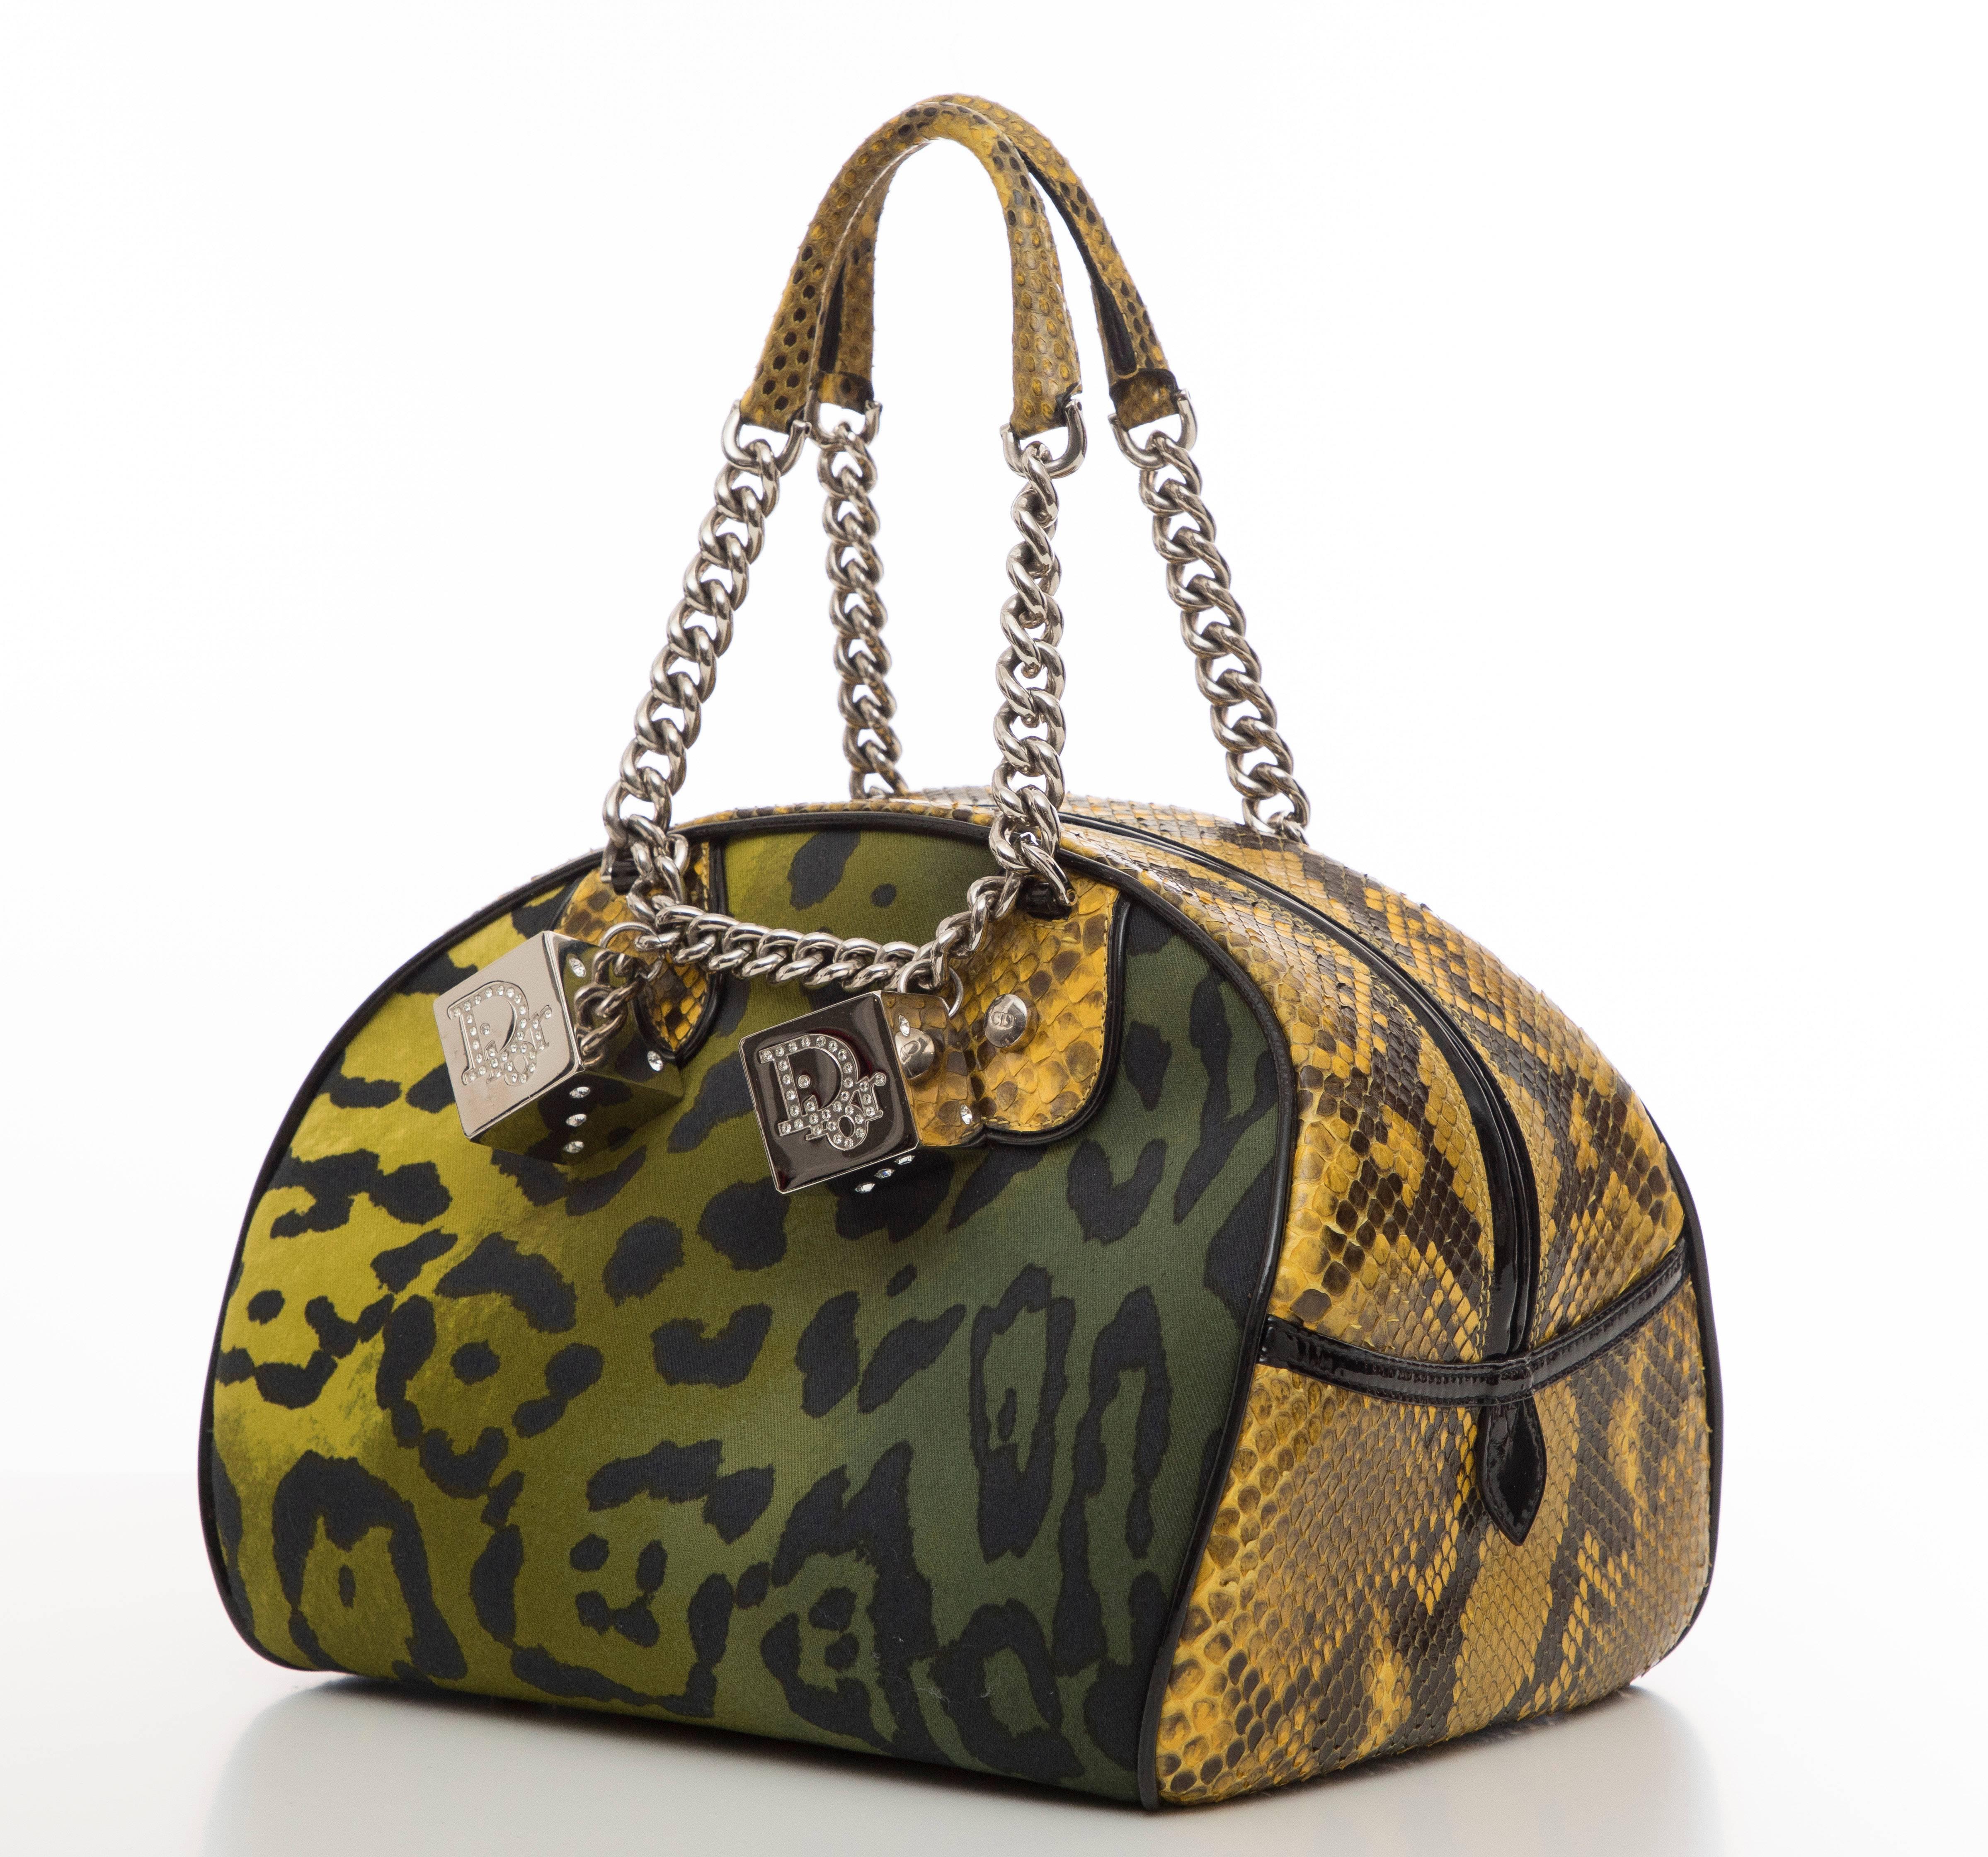 John Galliano for Christian Dior, Autumn-Winter 2004 leopard printed canvas handbag with silver-tone hardware, dual chain-link top handles, python and black patent leather trim, crystal embellished logo dice adornments, black Diorissimo woven